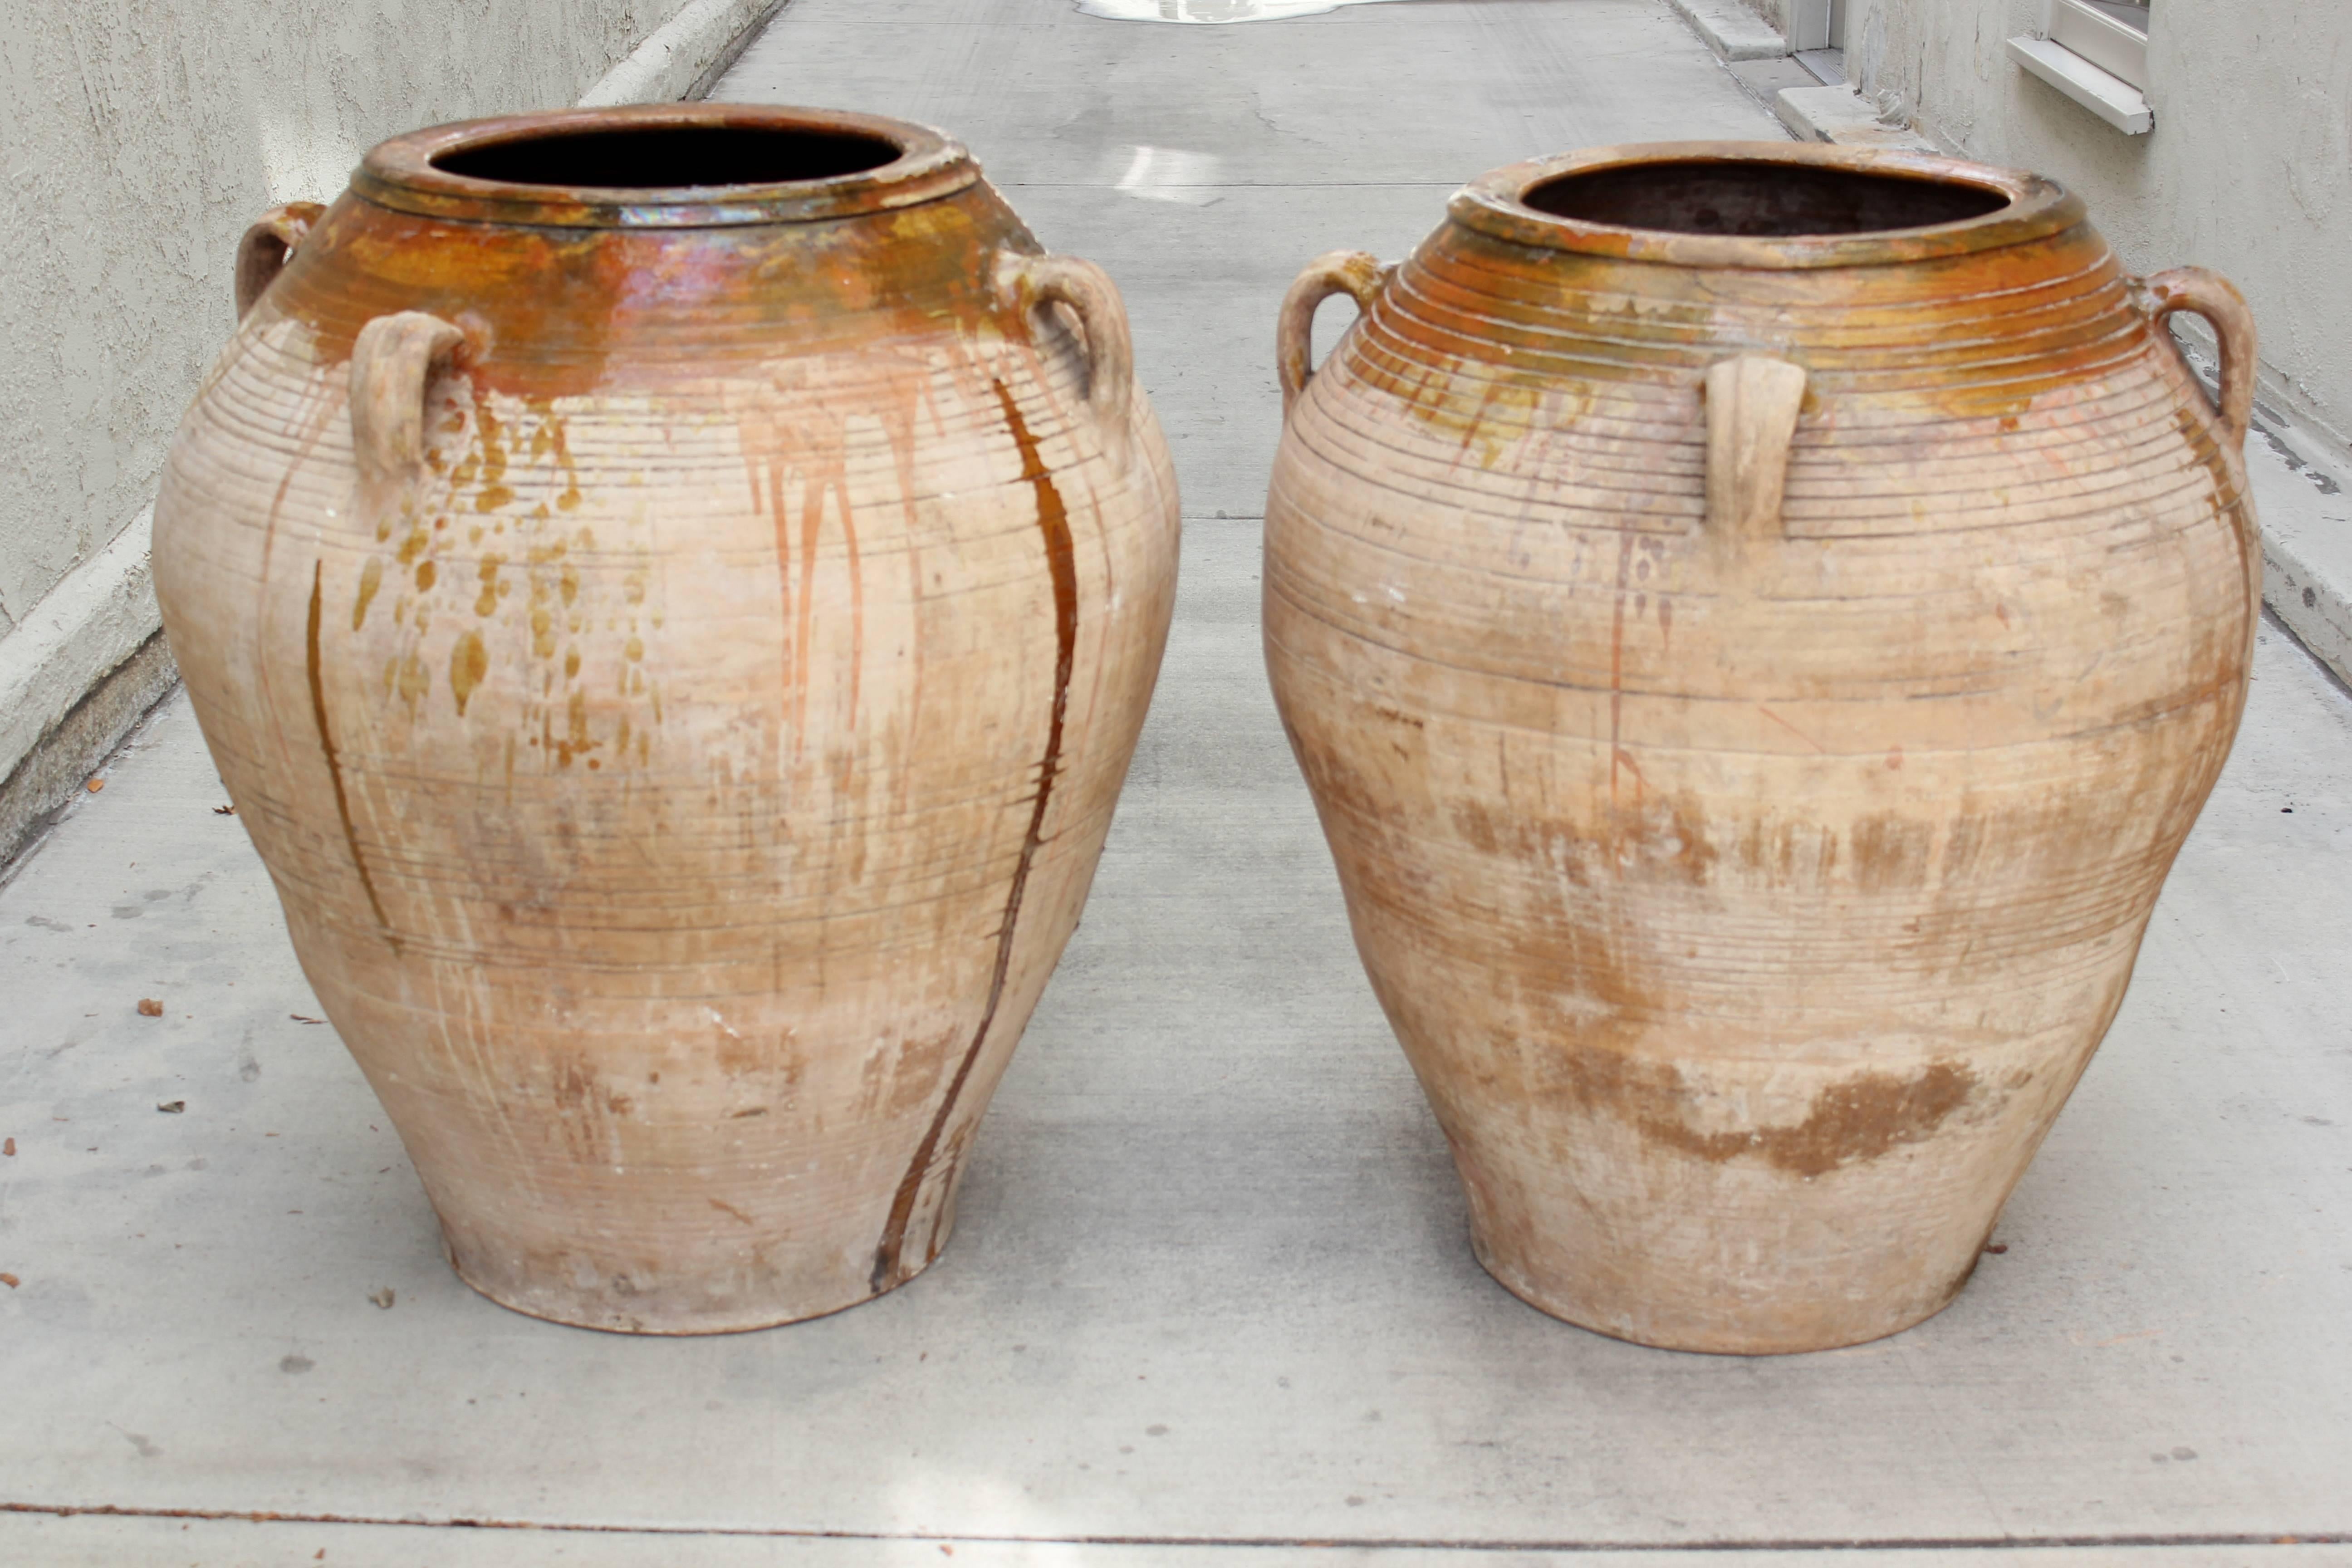 Pair of 19th century Spanish oil pots.
Measures: 3 ft. tall.